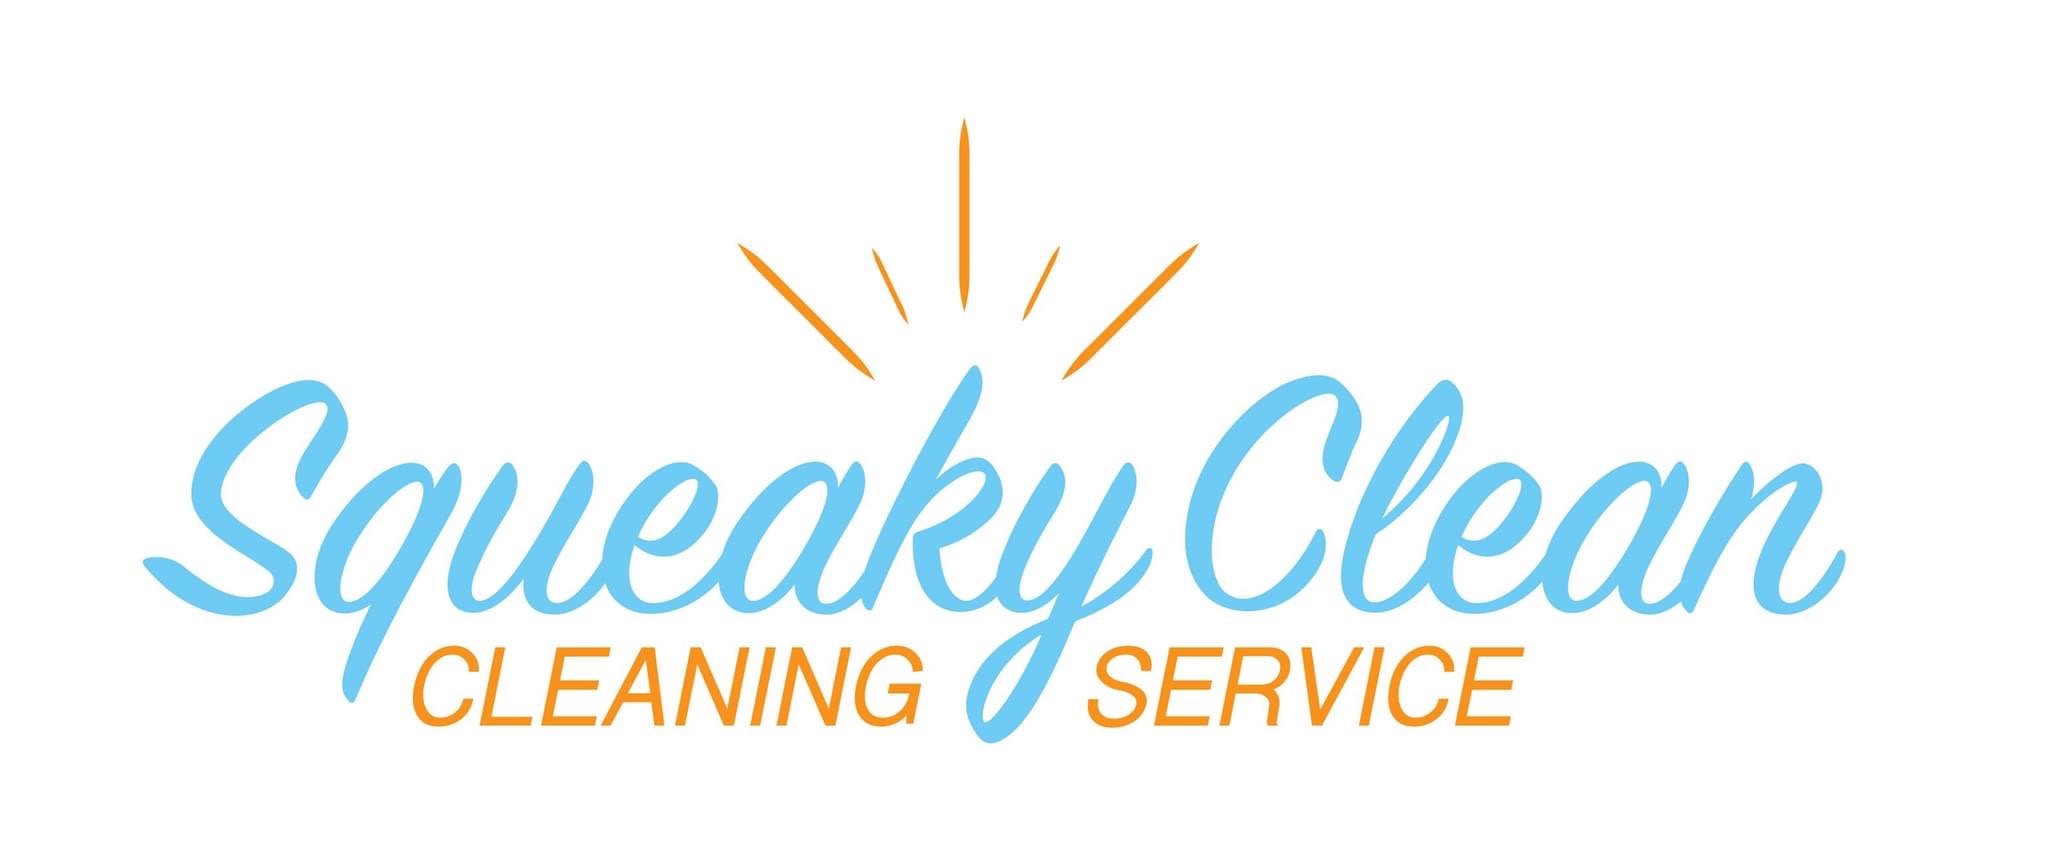 Squeaky Clean Cleaning Service Logo